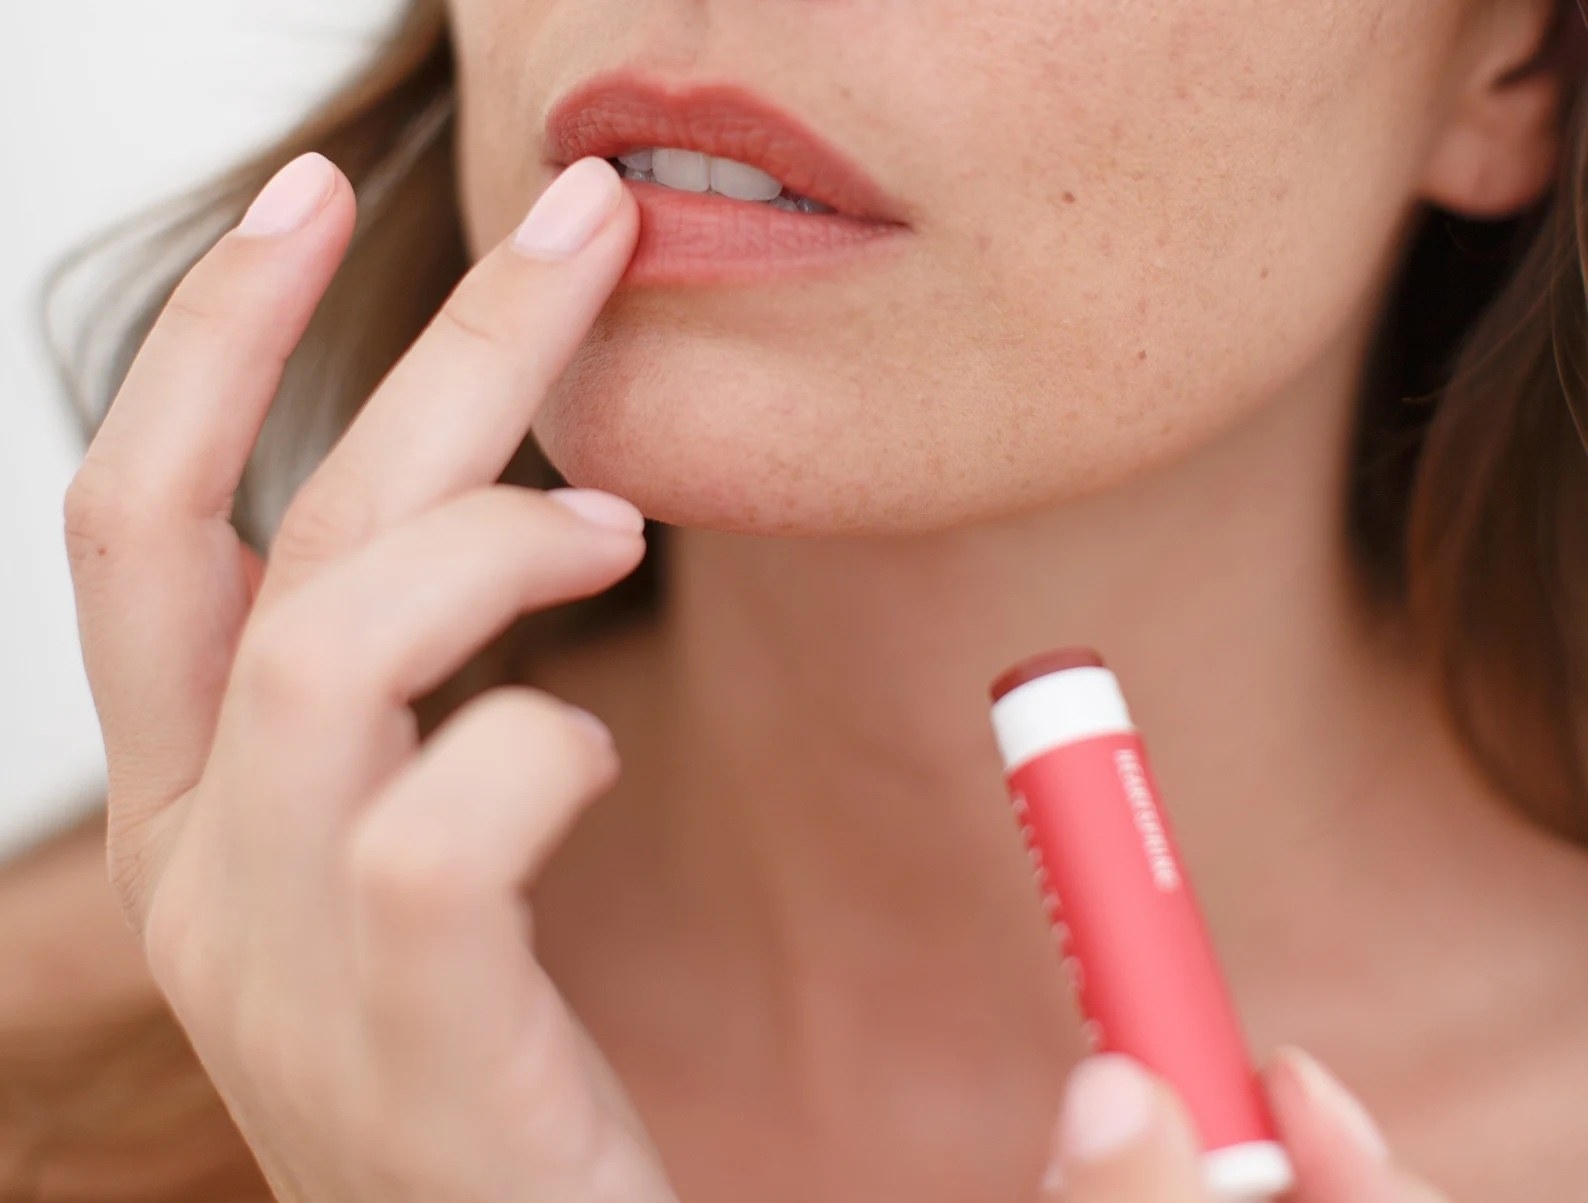 A model applying tinted lip balm to lip from a red tube